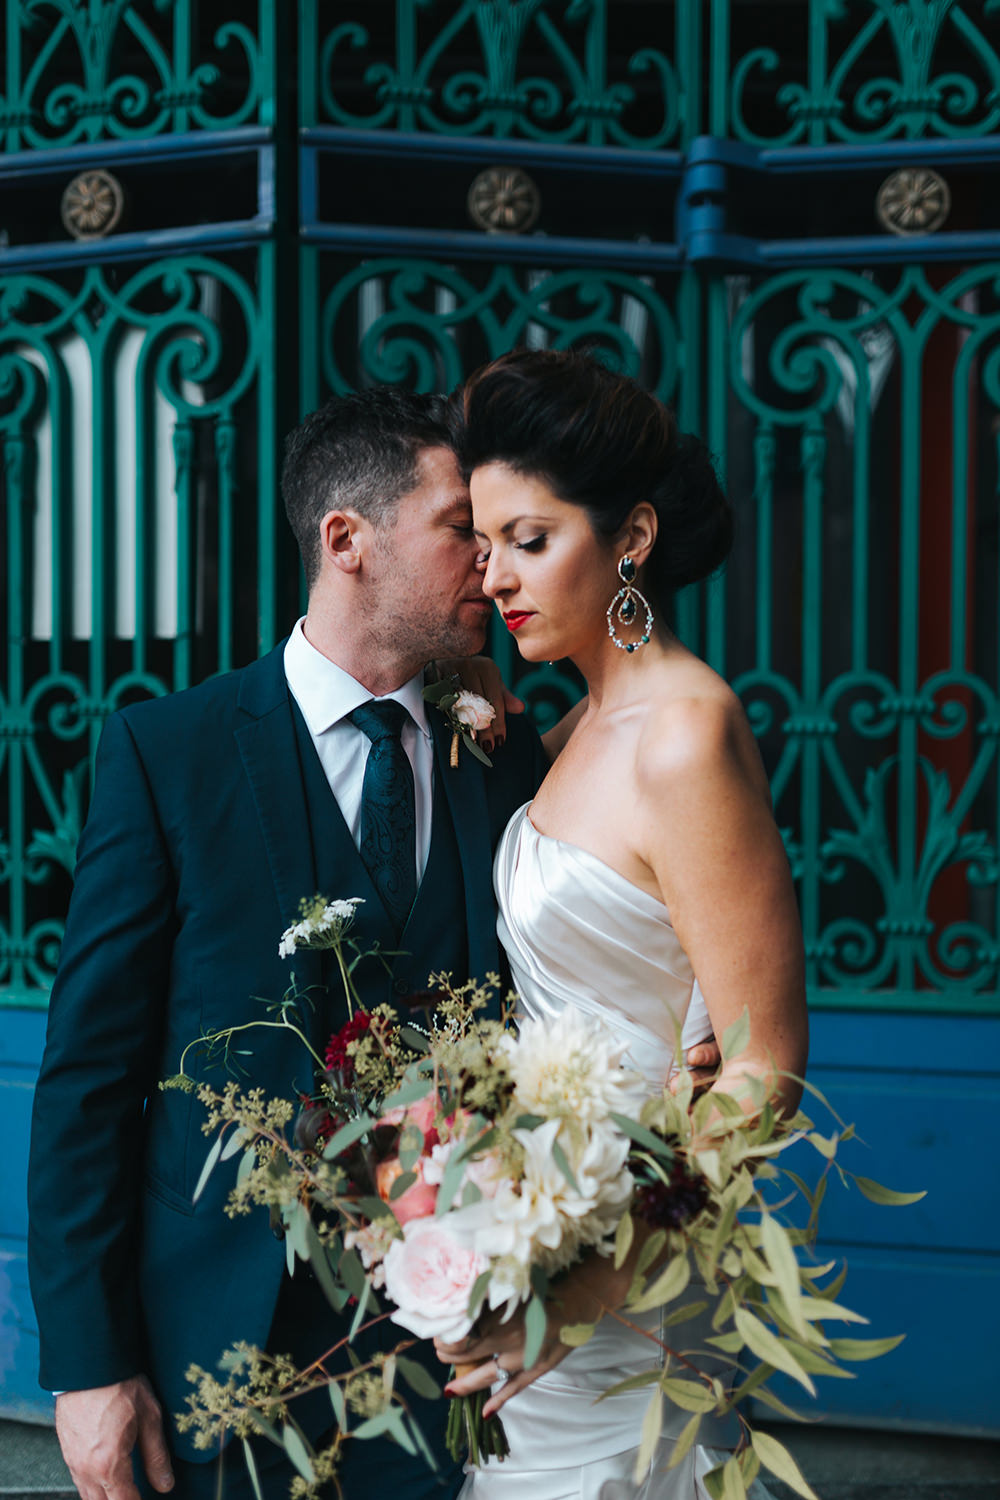 This elegant fall wedding took place in London, though many guests came from abroad